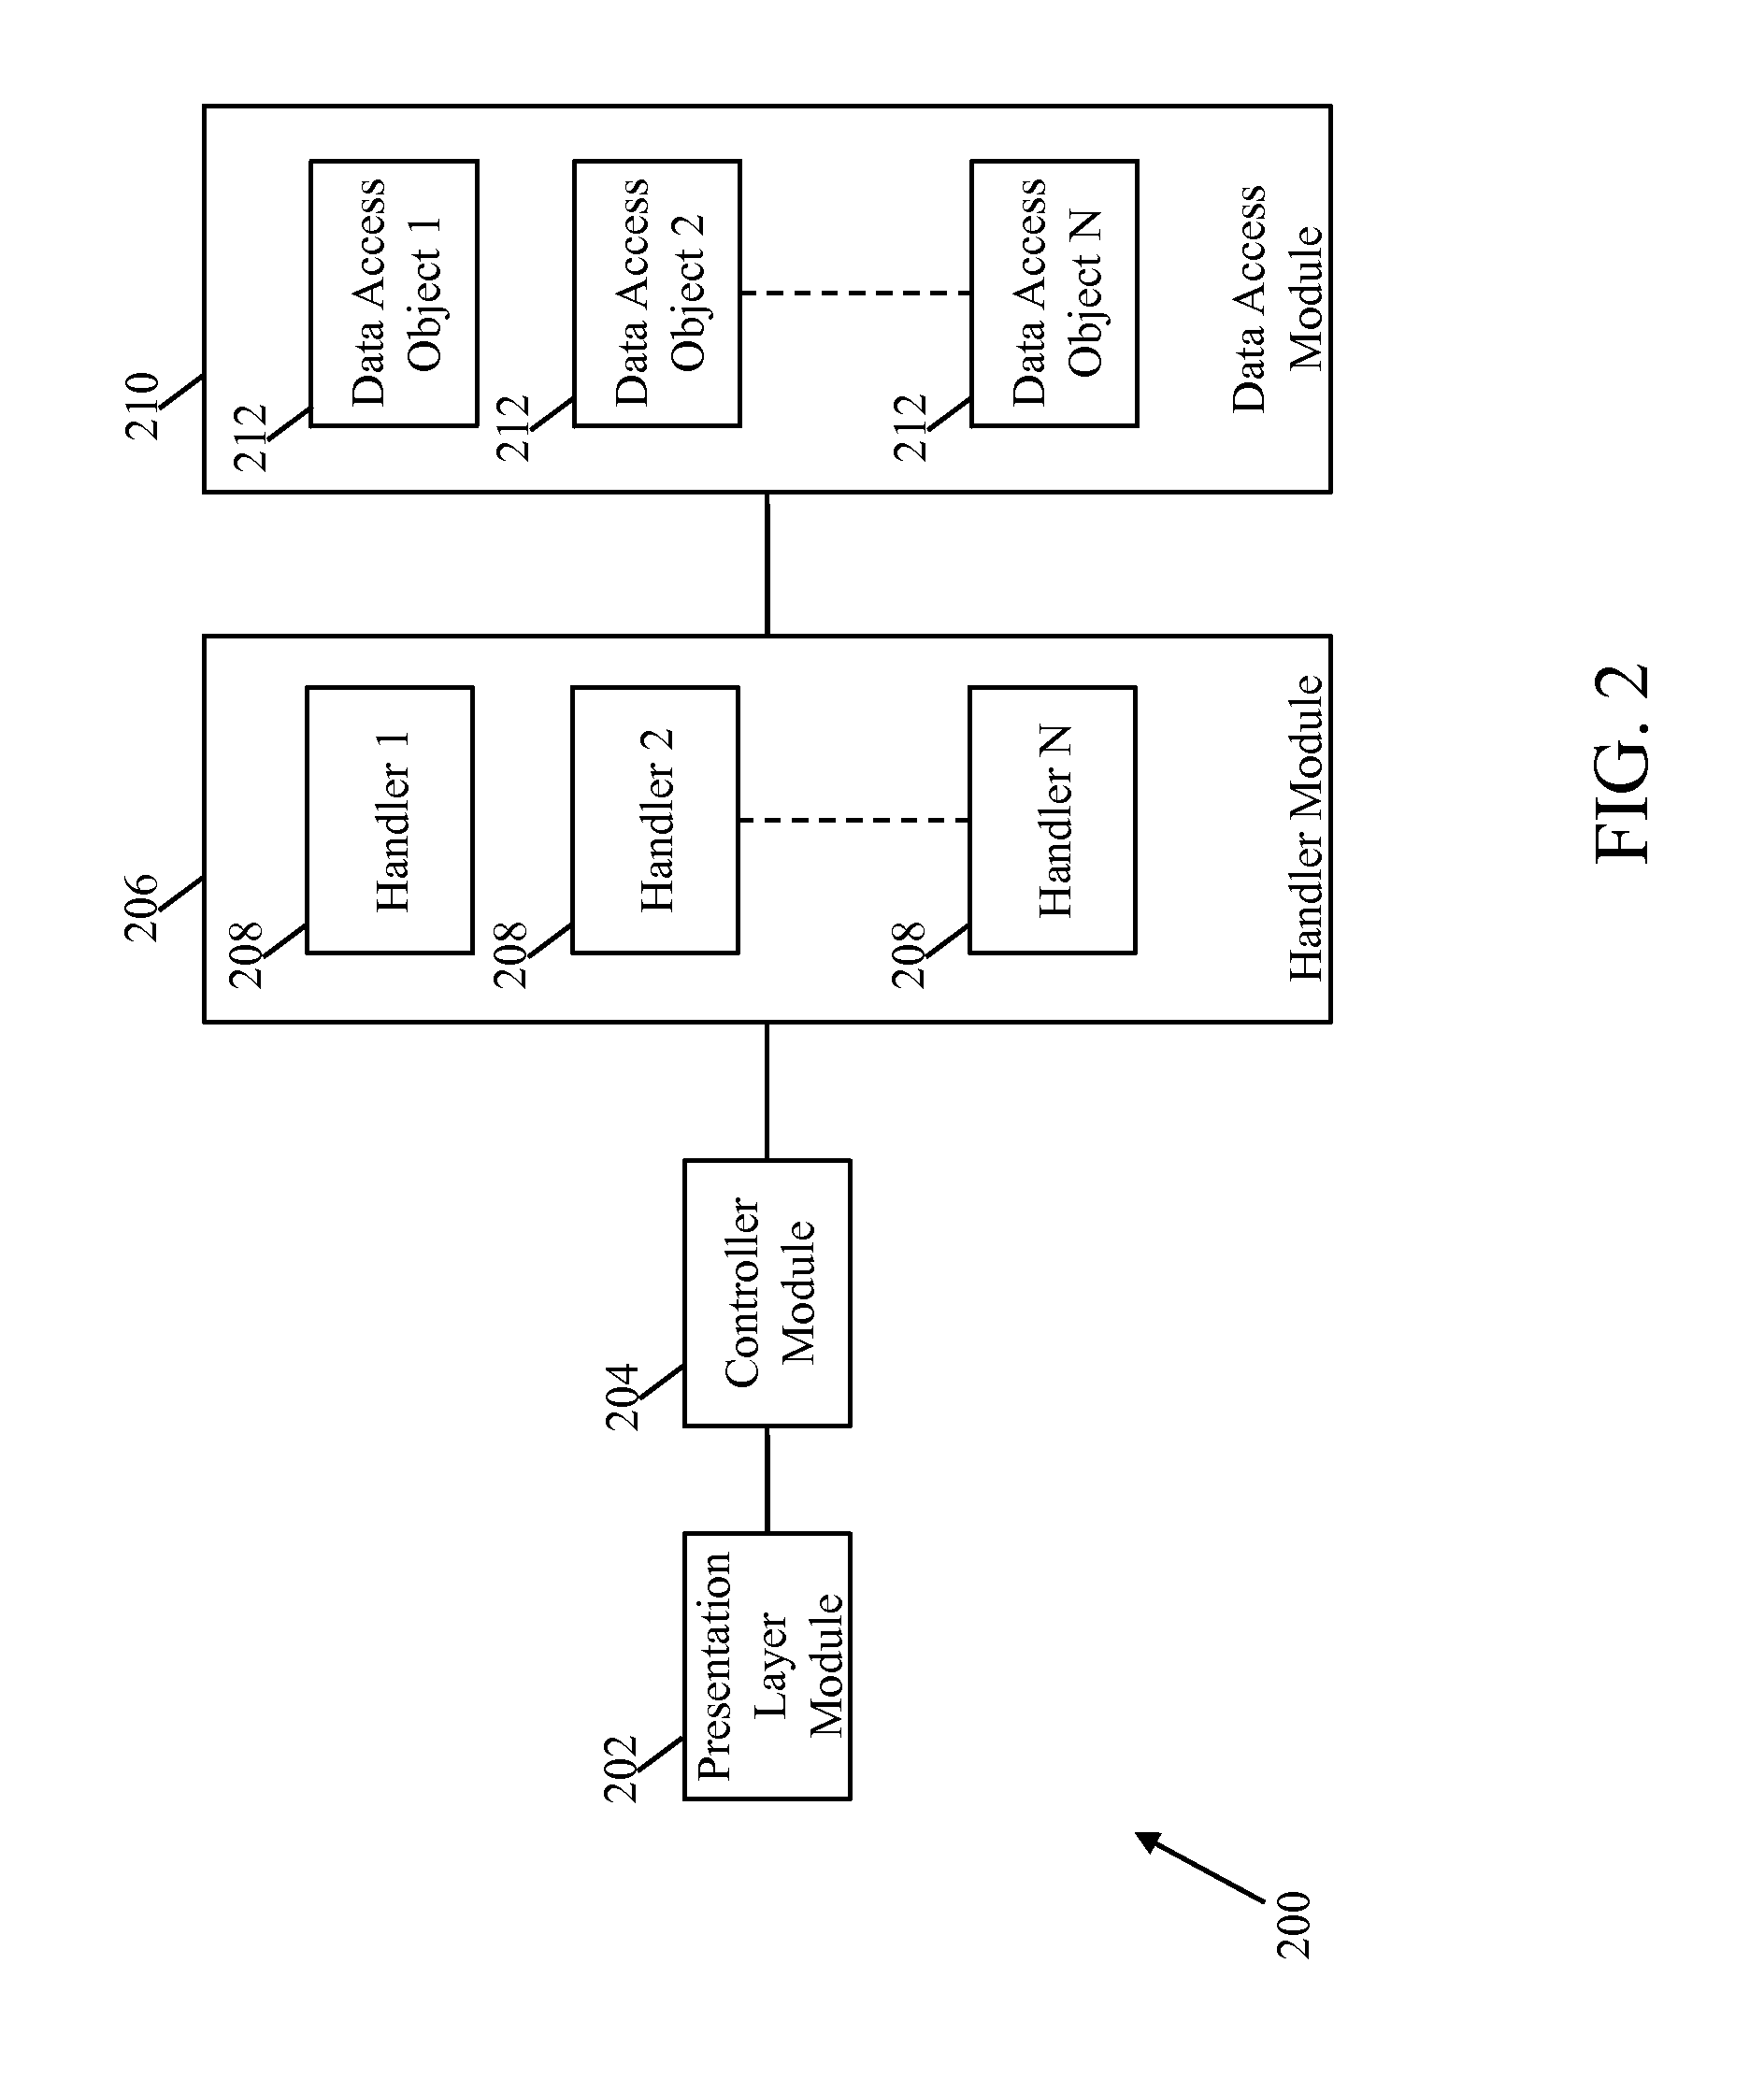 System and method for automating build deployment and testing processes